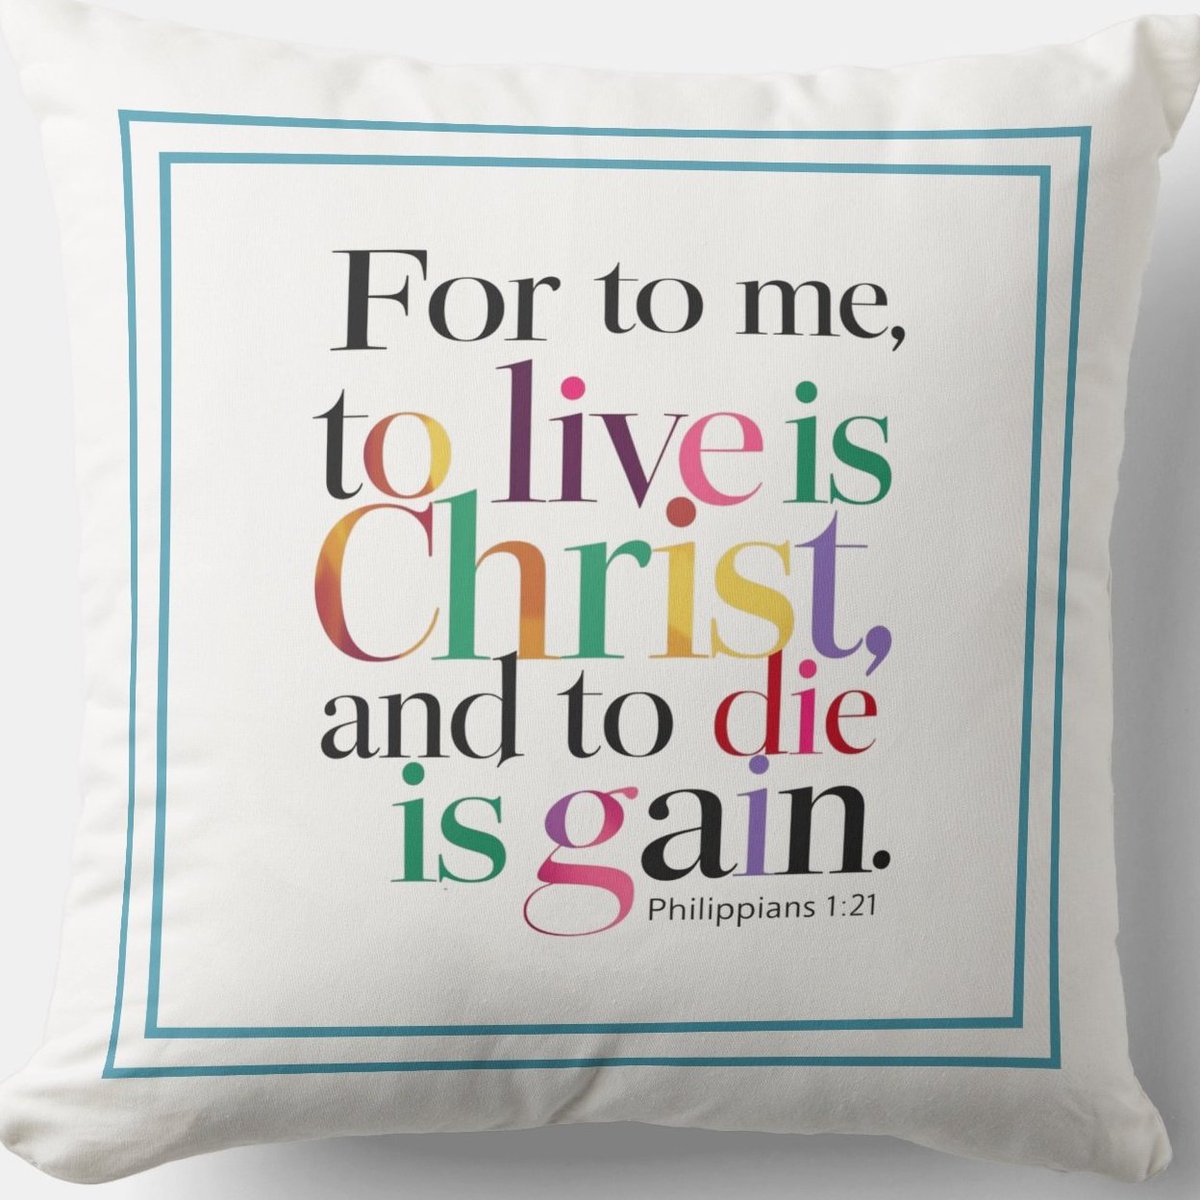 For To Me To Live Is Christ And To Die Is Gain zazzle.com/for_to_me_to_l… // #Pillow #Blessing #JesusChrist #JesusSaves #Jesus #christian #spiritual #Homedecoration #uniquegift #giftideas #MothersDayGifts #giftformom #giftidea #HolySpirit #pillows #giftshop #giftsforher #giftsformom